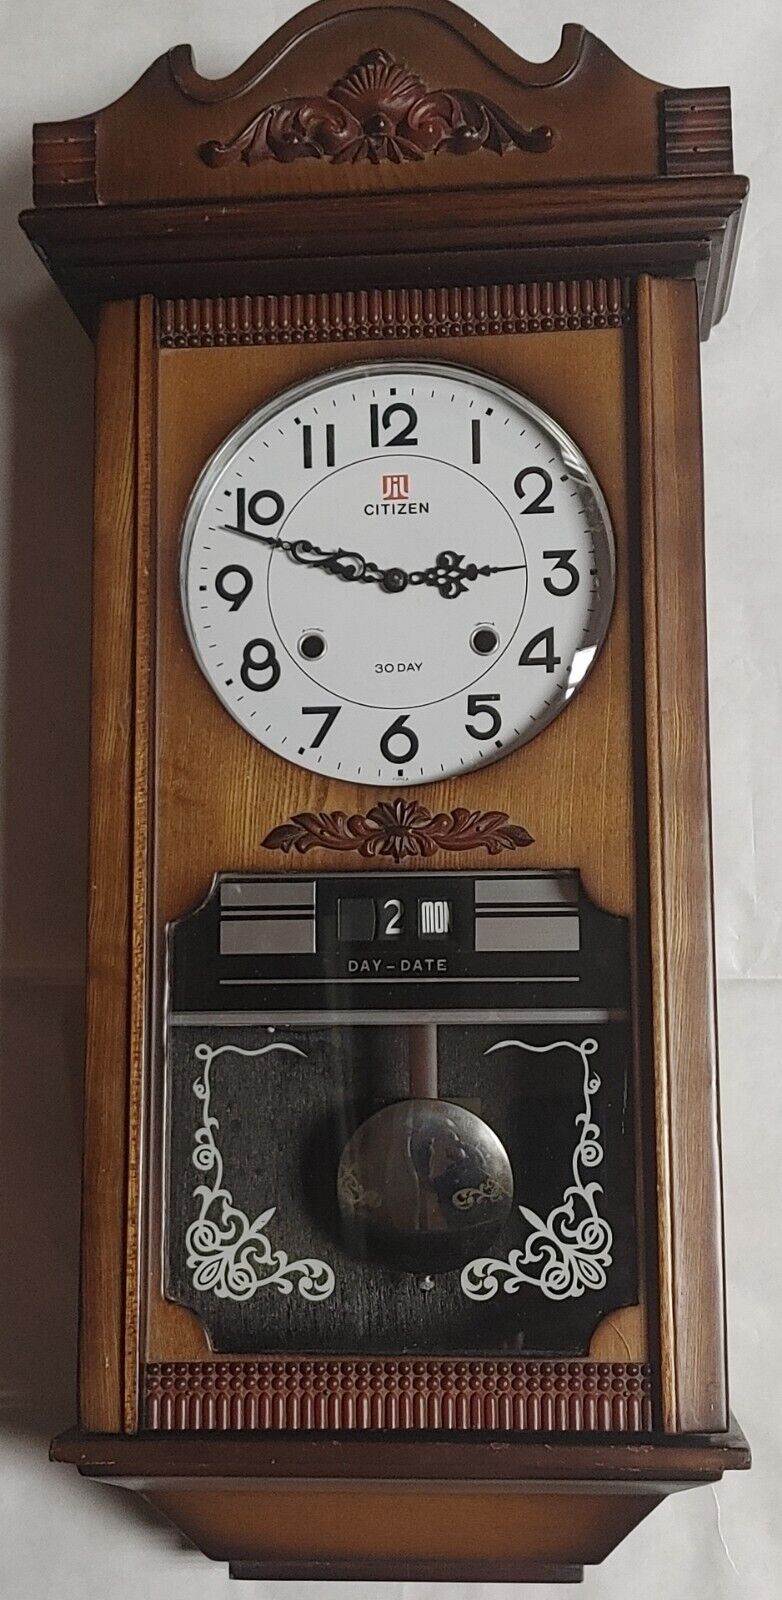 VINTAGE CITIZEN 30 DAY WINDING WALL CLOCK WITH CHIMES,DAY-DATE,MADE IN KOREA.